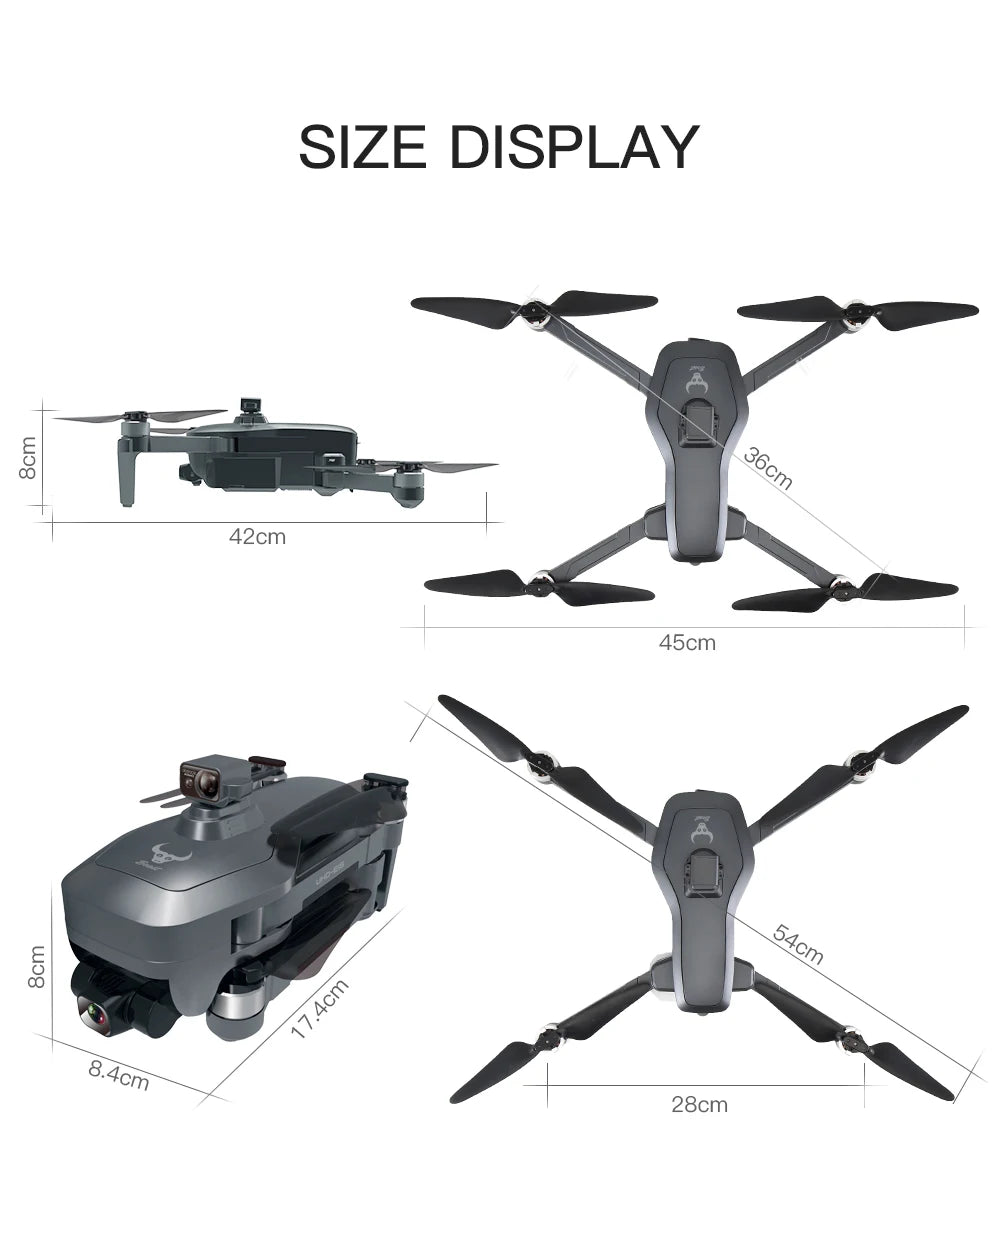 HGIYI SG906 MAX2  Drone, fix point surround: find the center point of the surround, and then use the joystick to